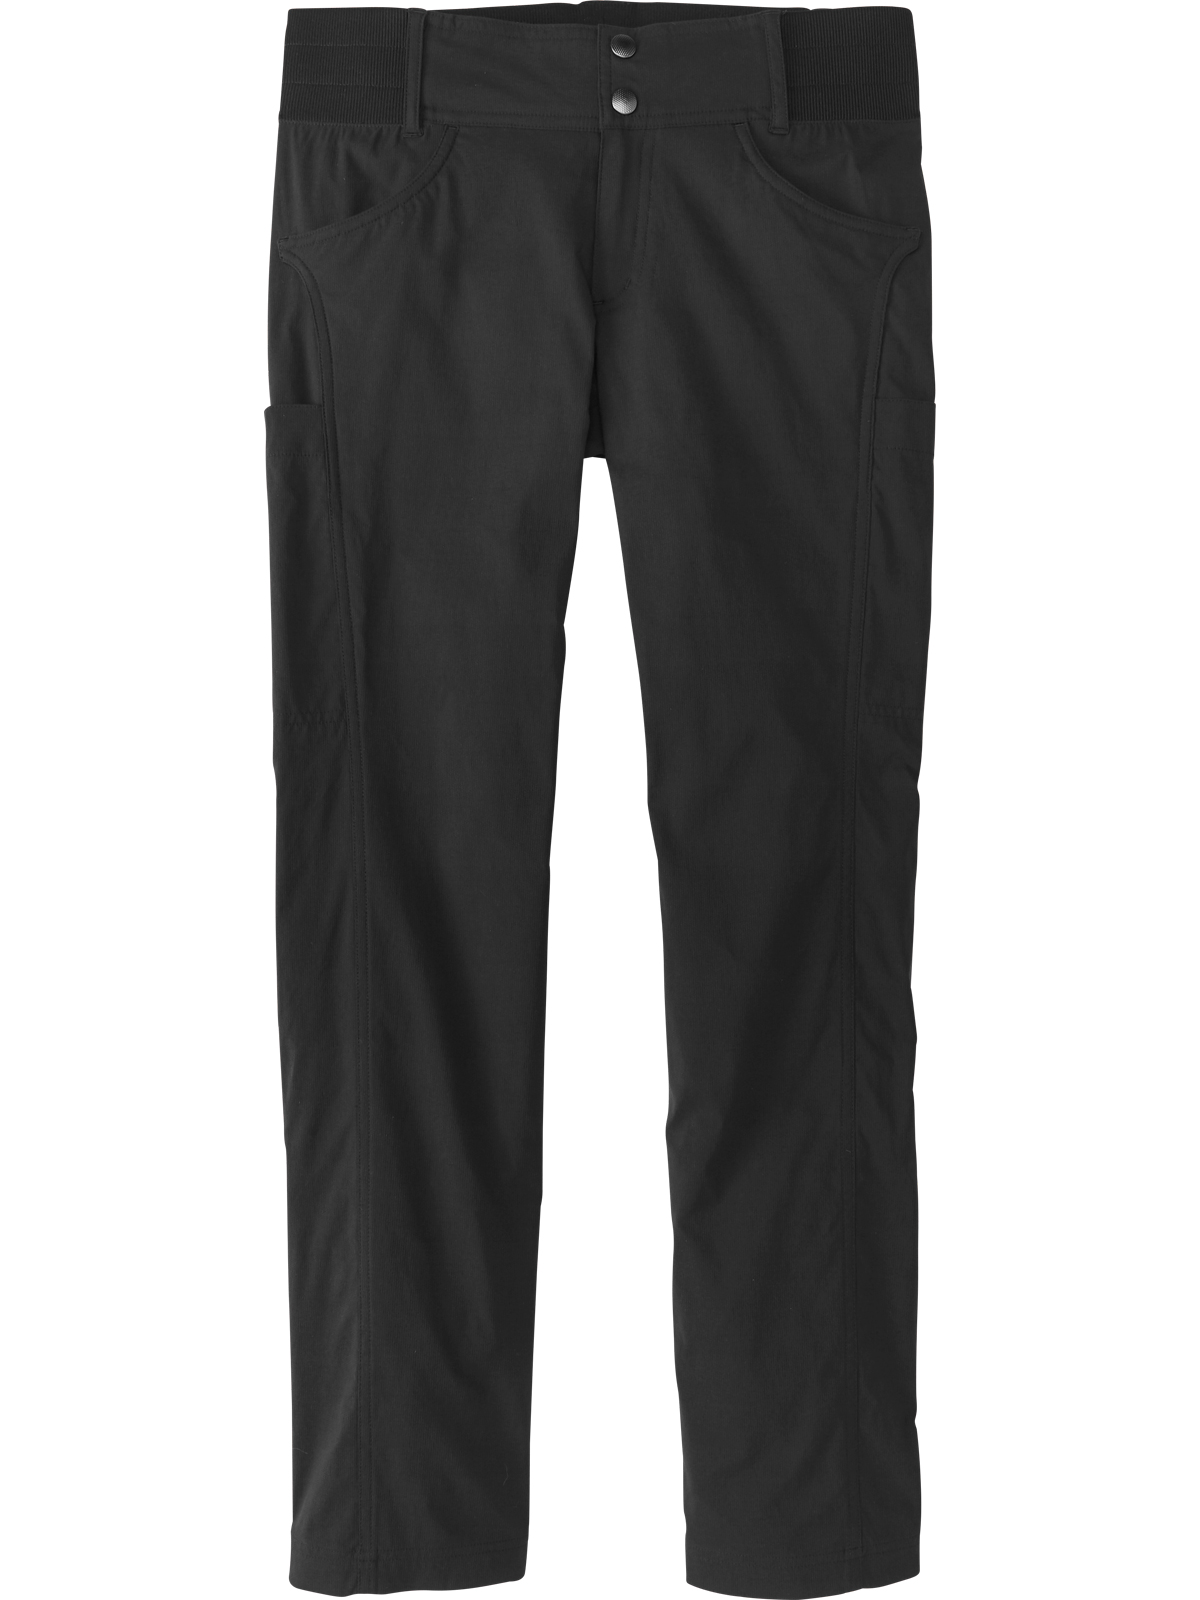 Hiking Pants Women: Recycled Clamber 30 inseam